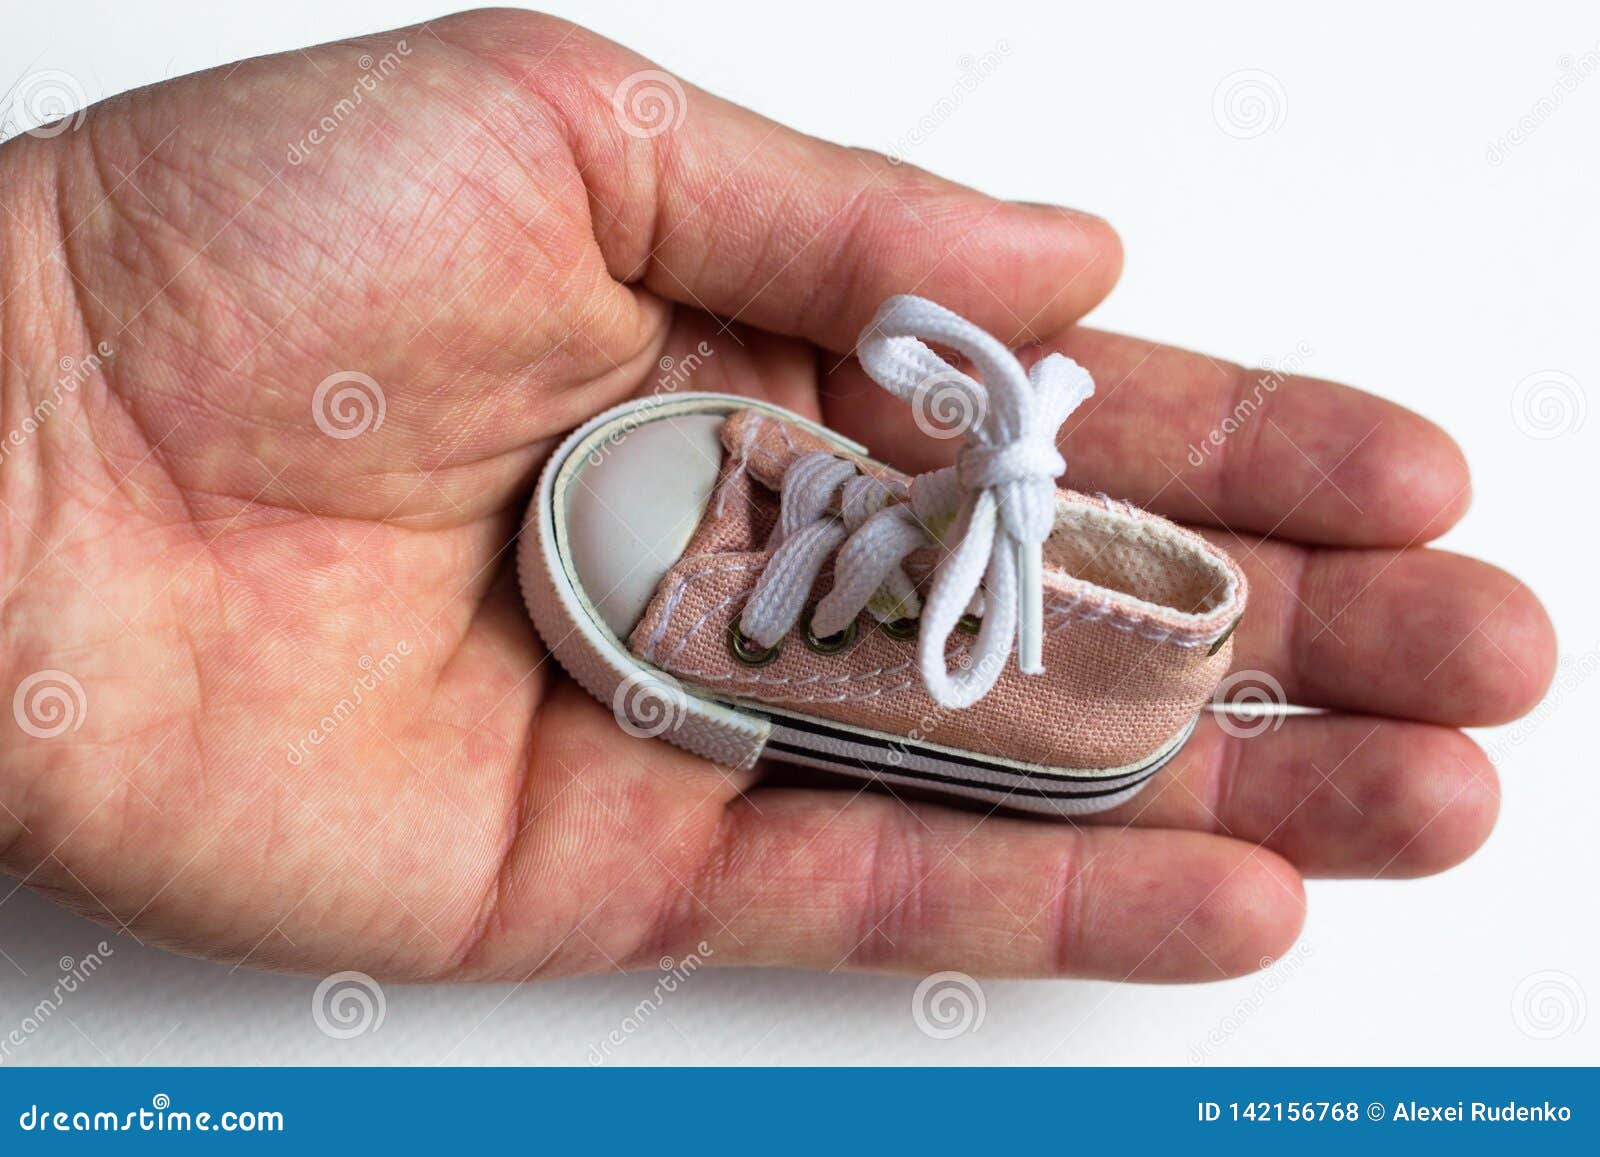 in a large and strong male hand is a small children`s shoes. on shoes tied with a bow bow.